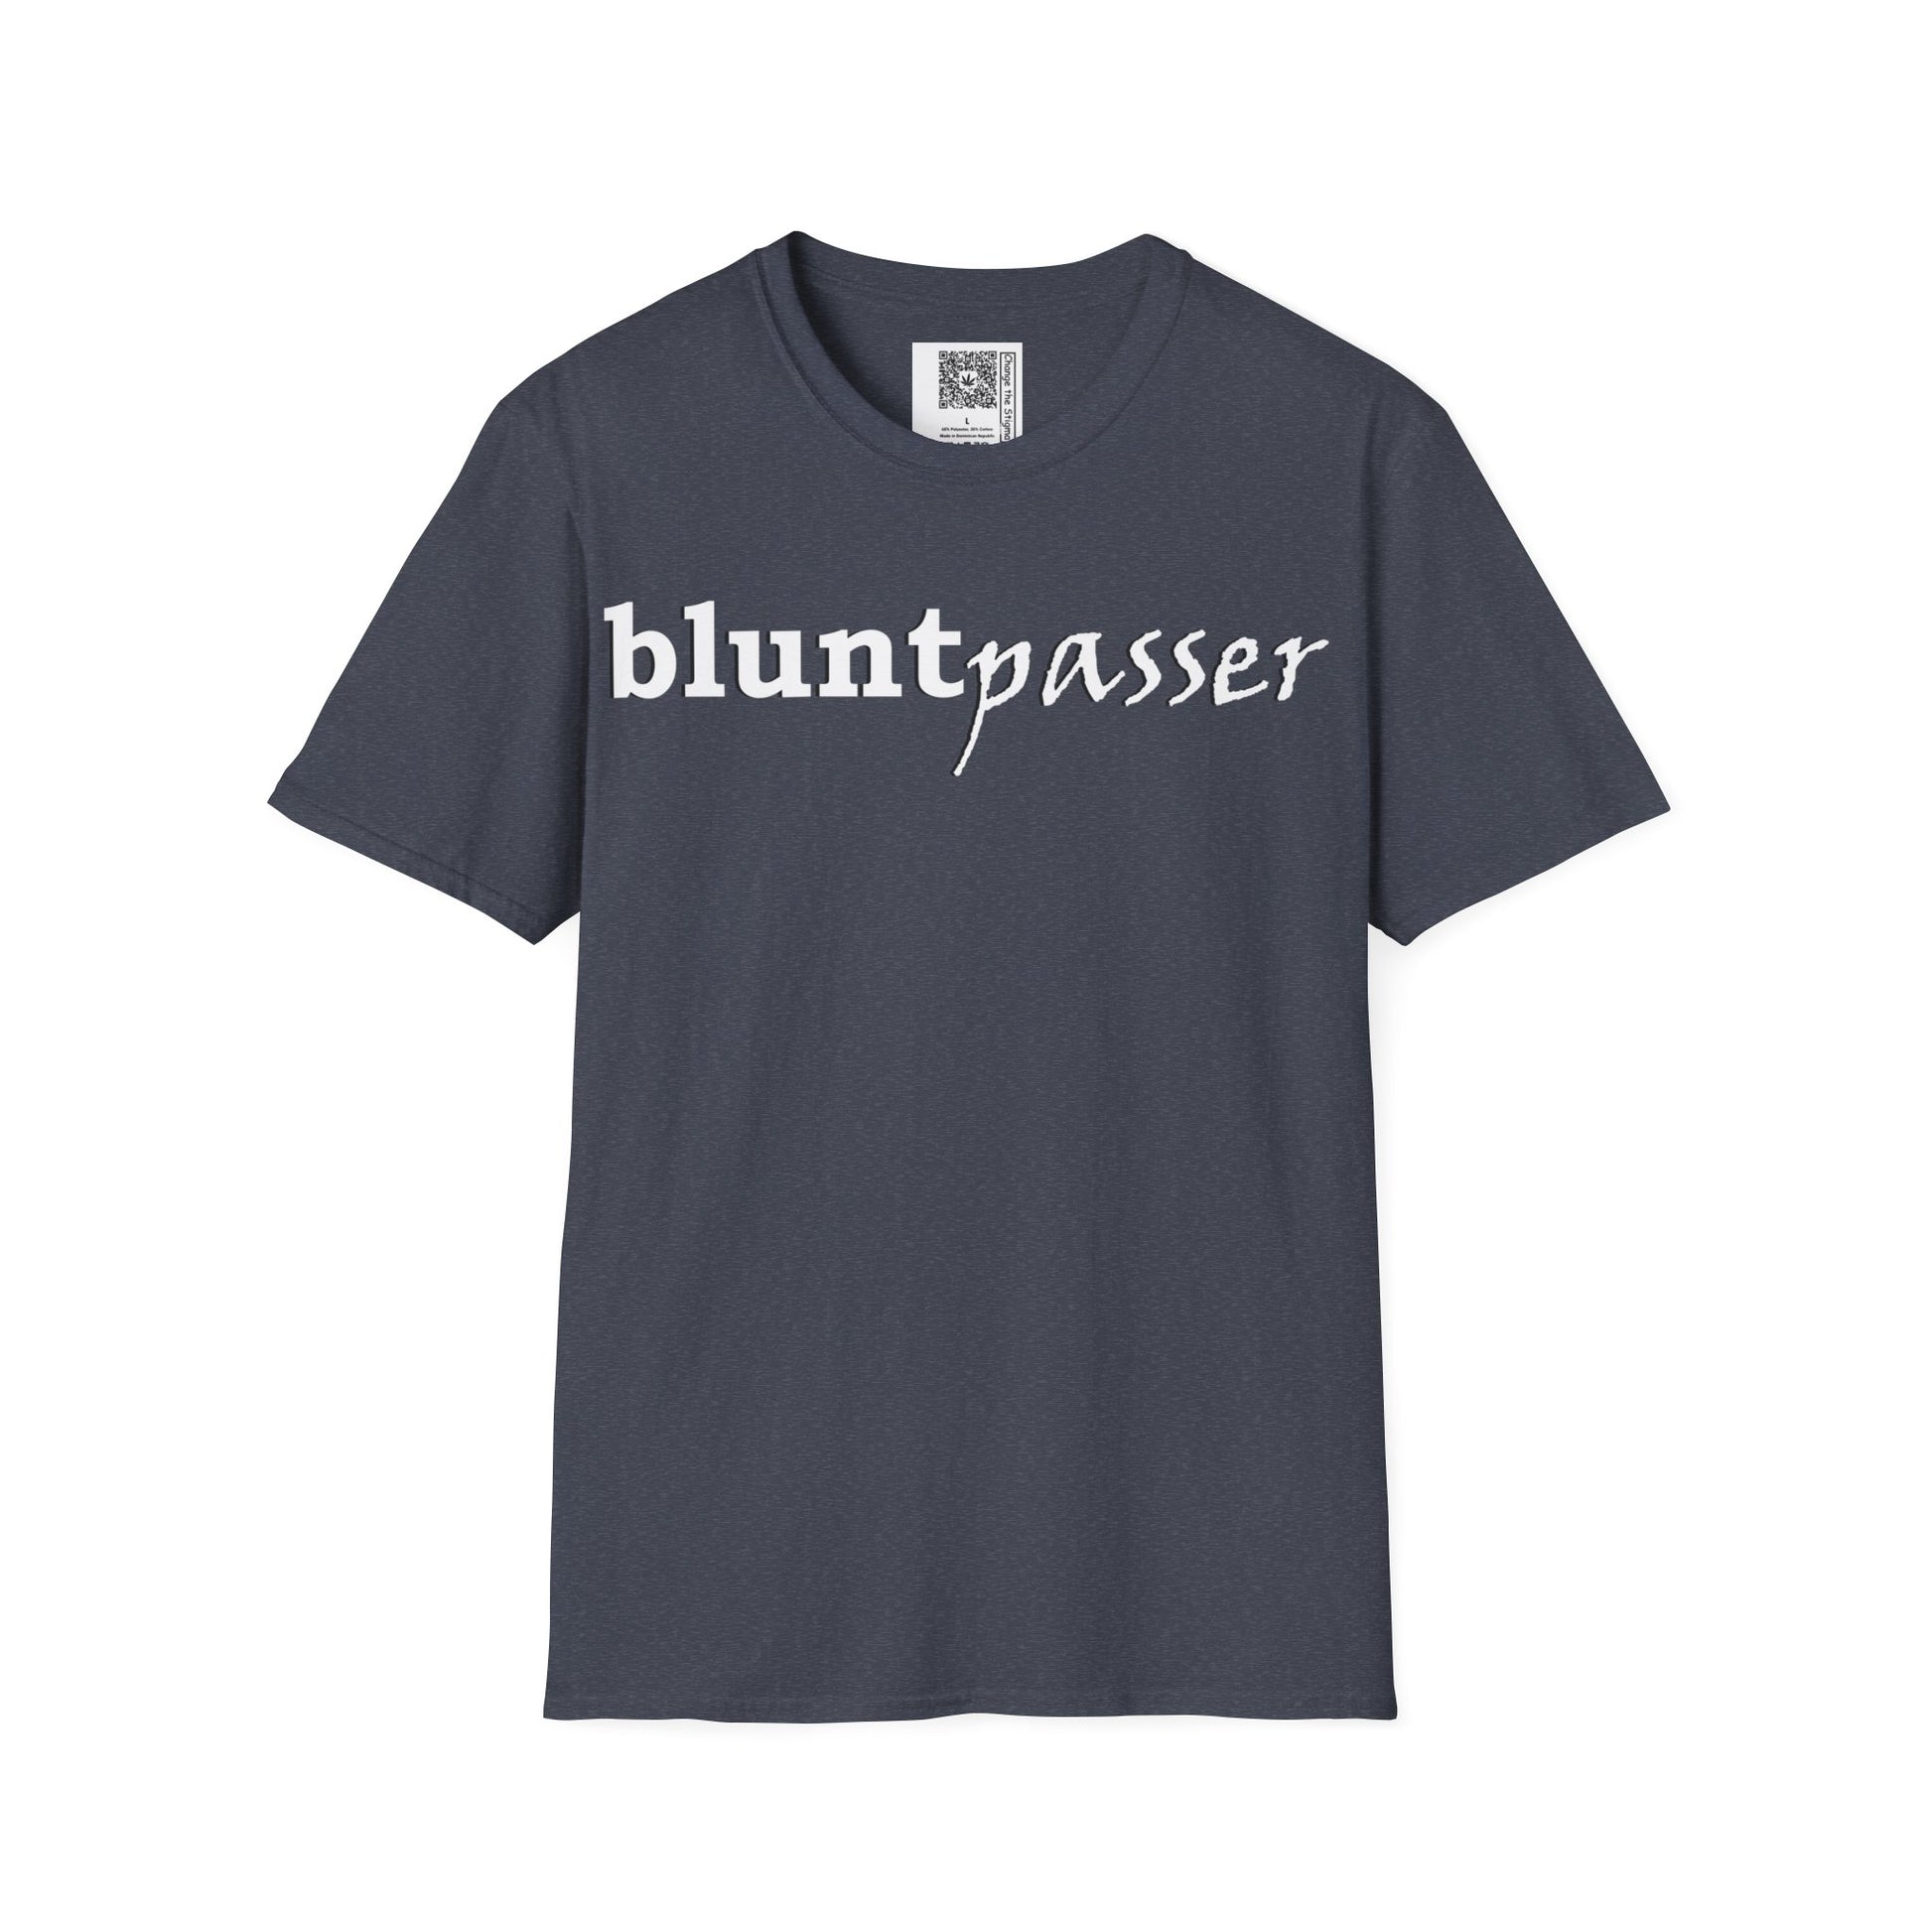 Change the Stigma, Heather Navy color, shirt saying "blunt passer", Shirt is open displayed, Qr code is shown neck tag